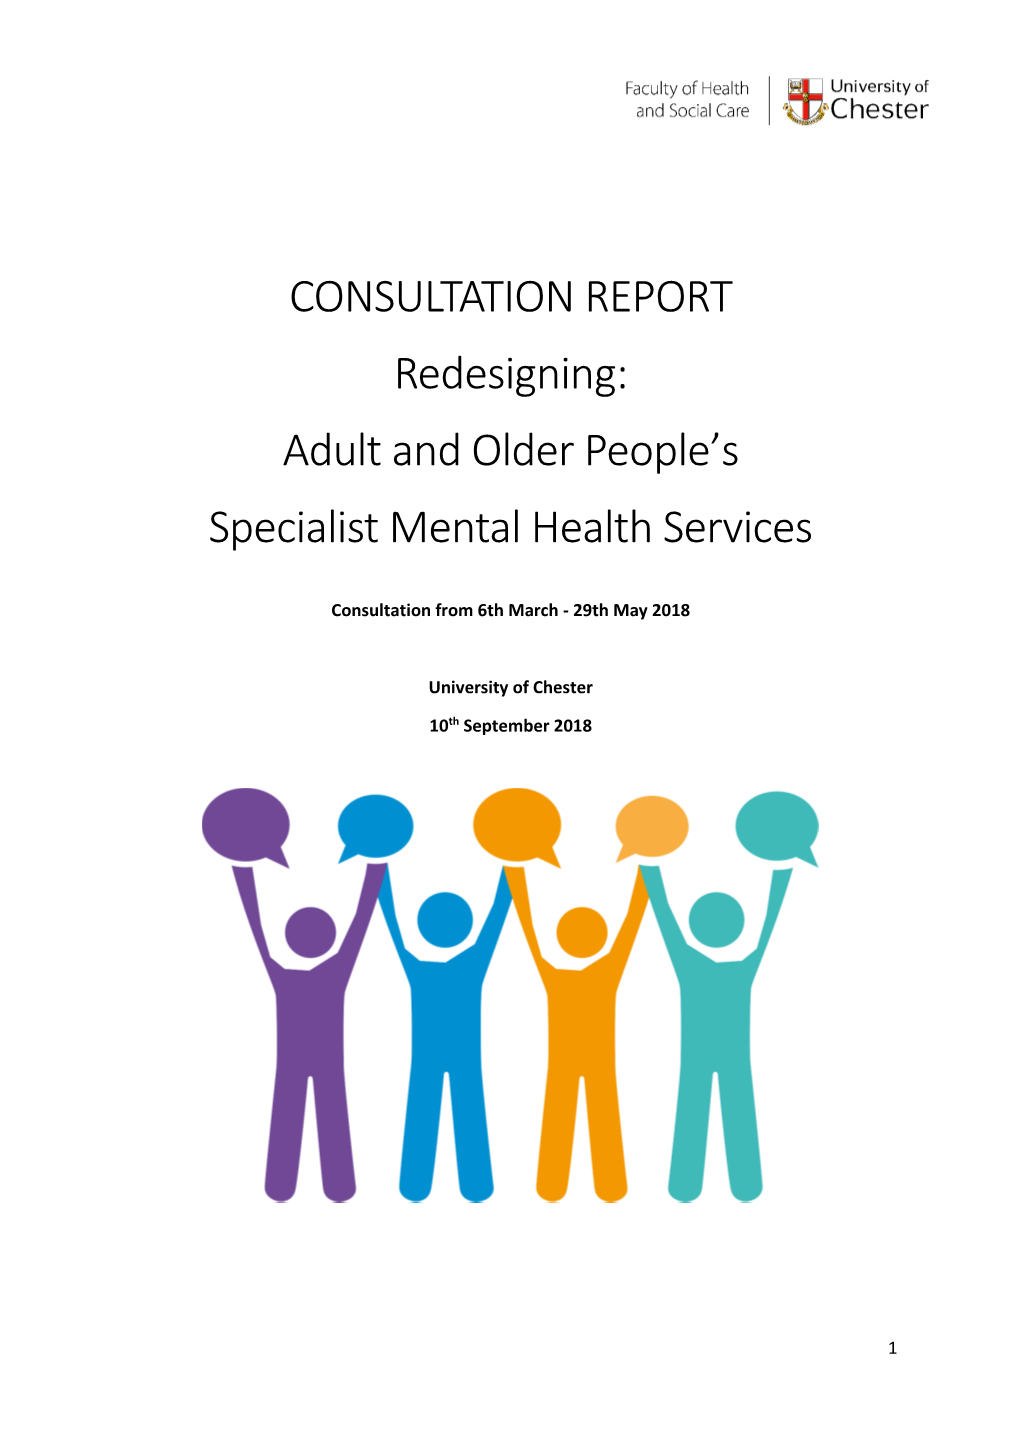 CONSULTATION REPORT Redesigning: Adult and Older People’S Specialist Mental Health Services